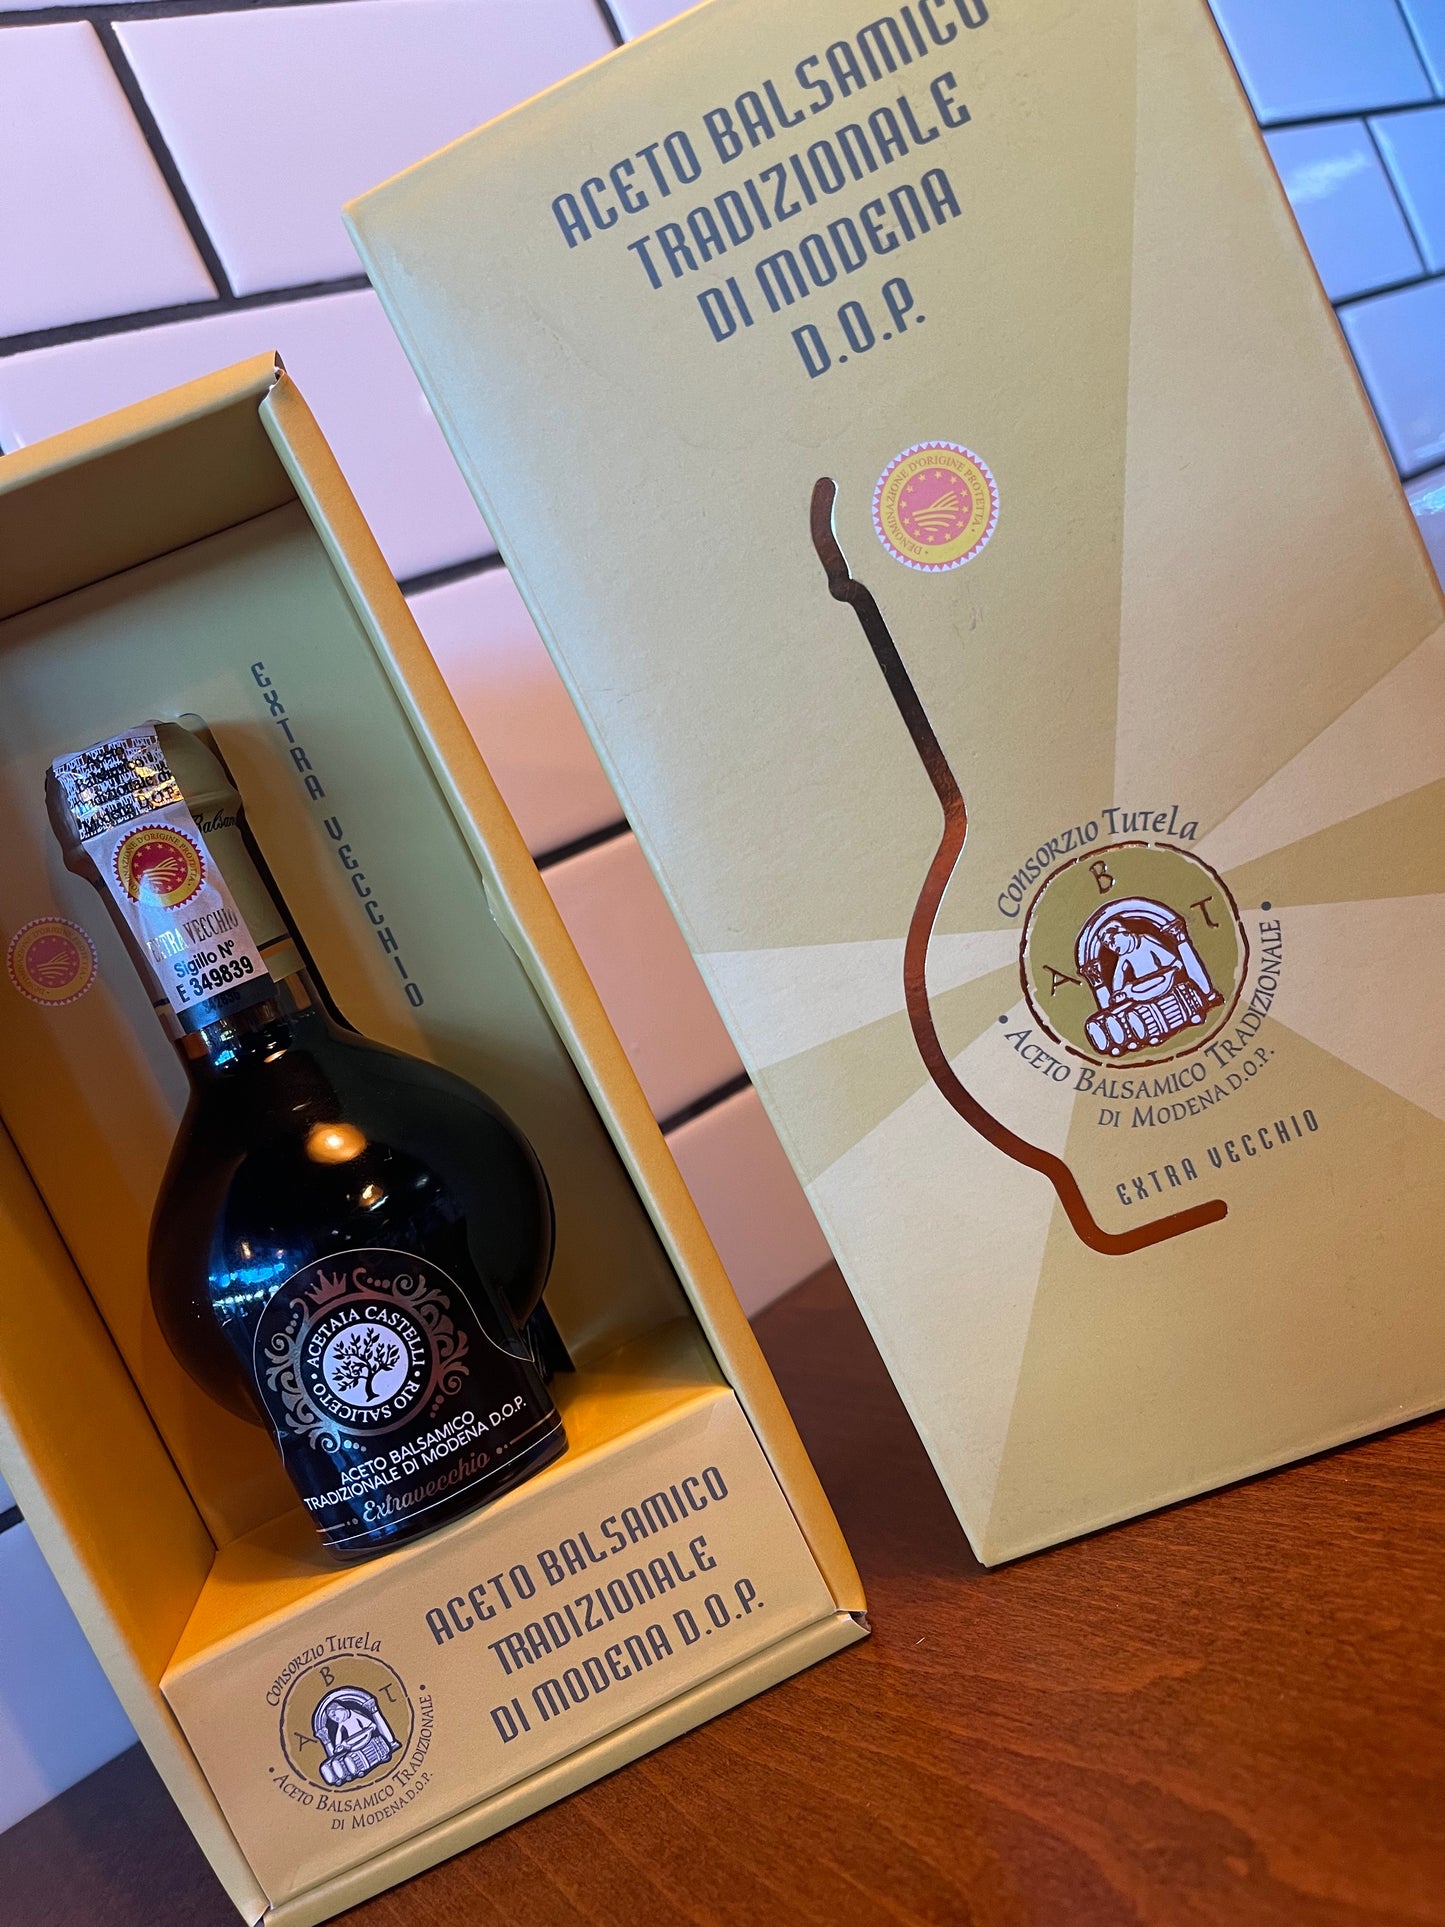 Acetaia Castelli Imported Aged Balsamic of Modena "Affinato" Extra-Vecchio 25 year